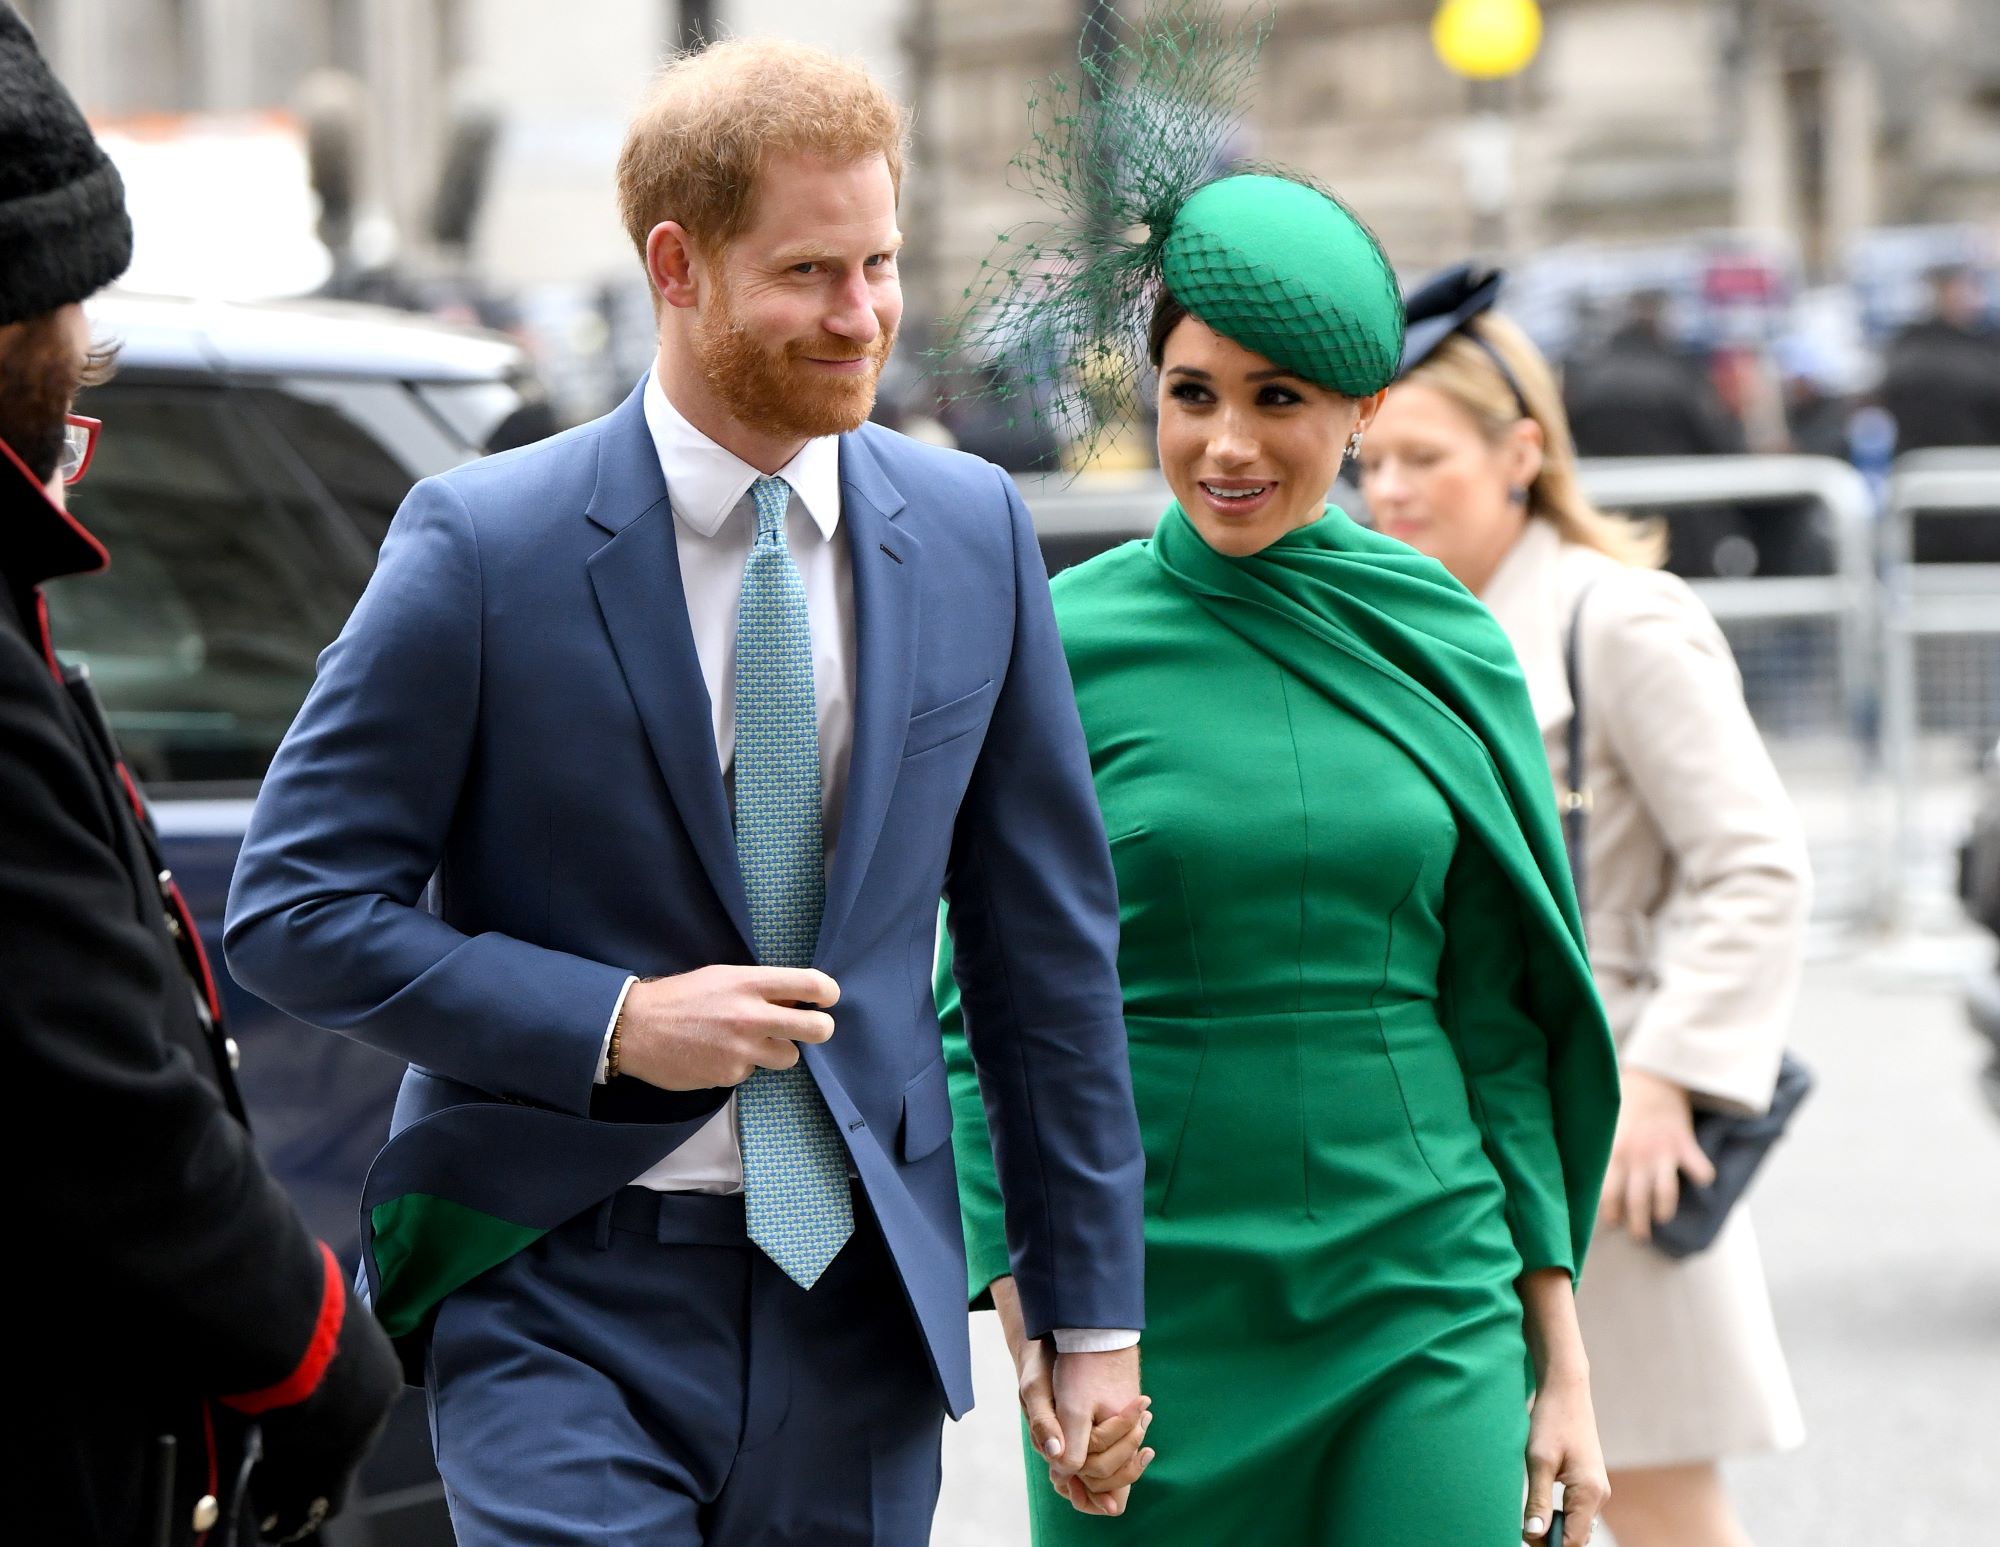 Prince Harry wears a blue suit, a white button-up shirt, a light blue tie with a darker blue pattern. Meghan Markle walks next to him, holding his hand a solid green dress and green hat. The background is a city scene with blurred cars and people walking behind.